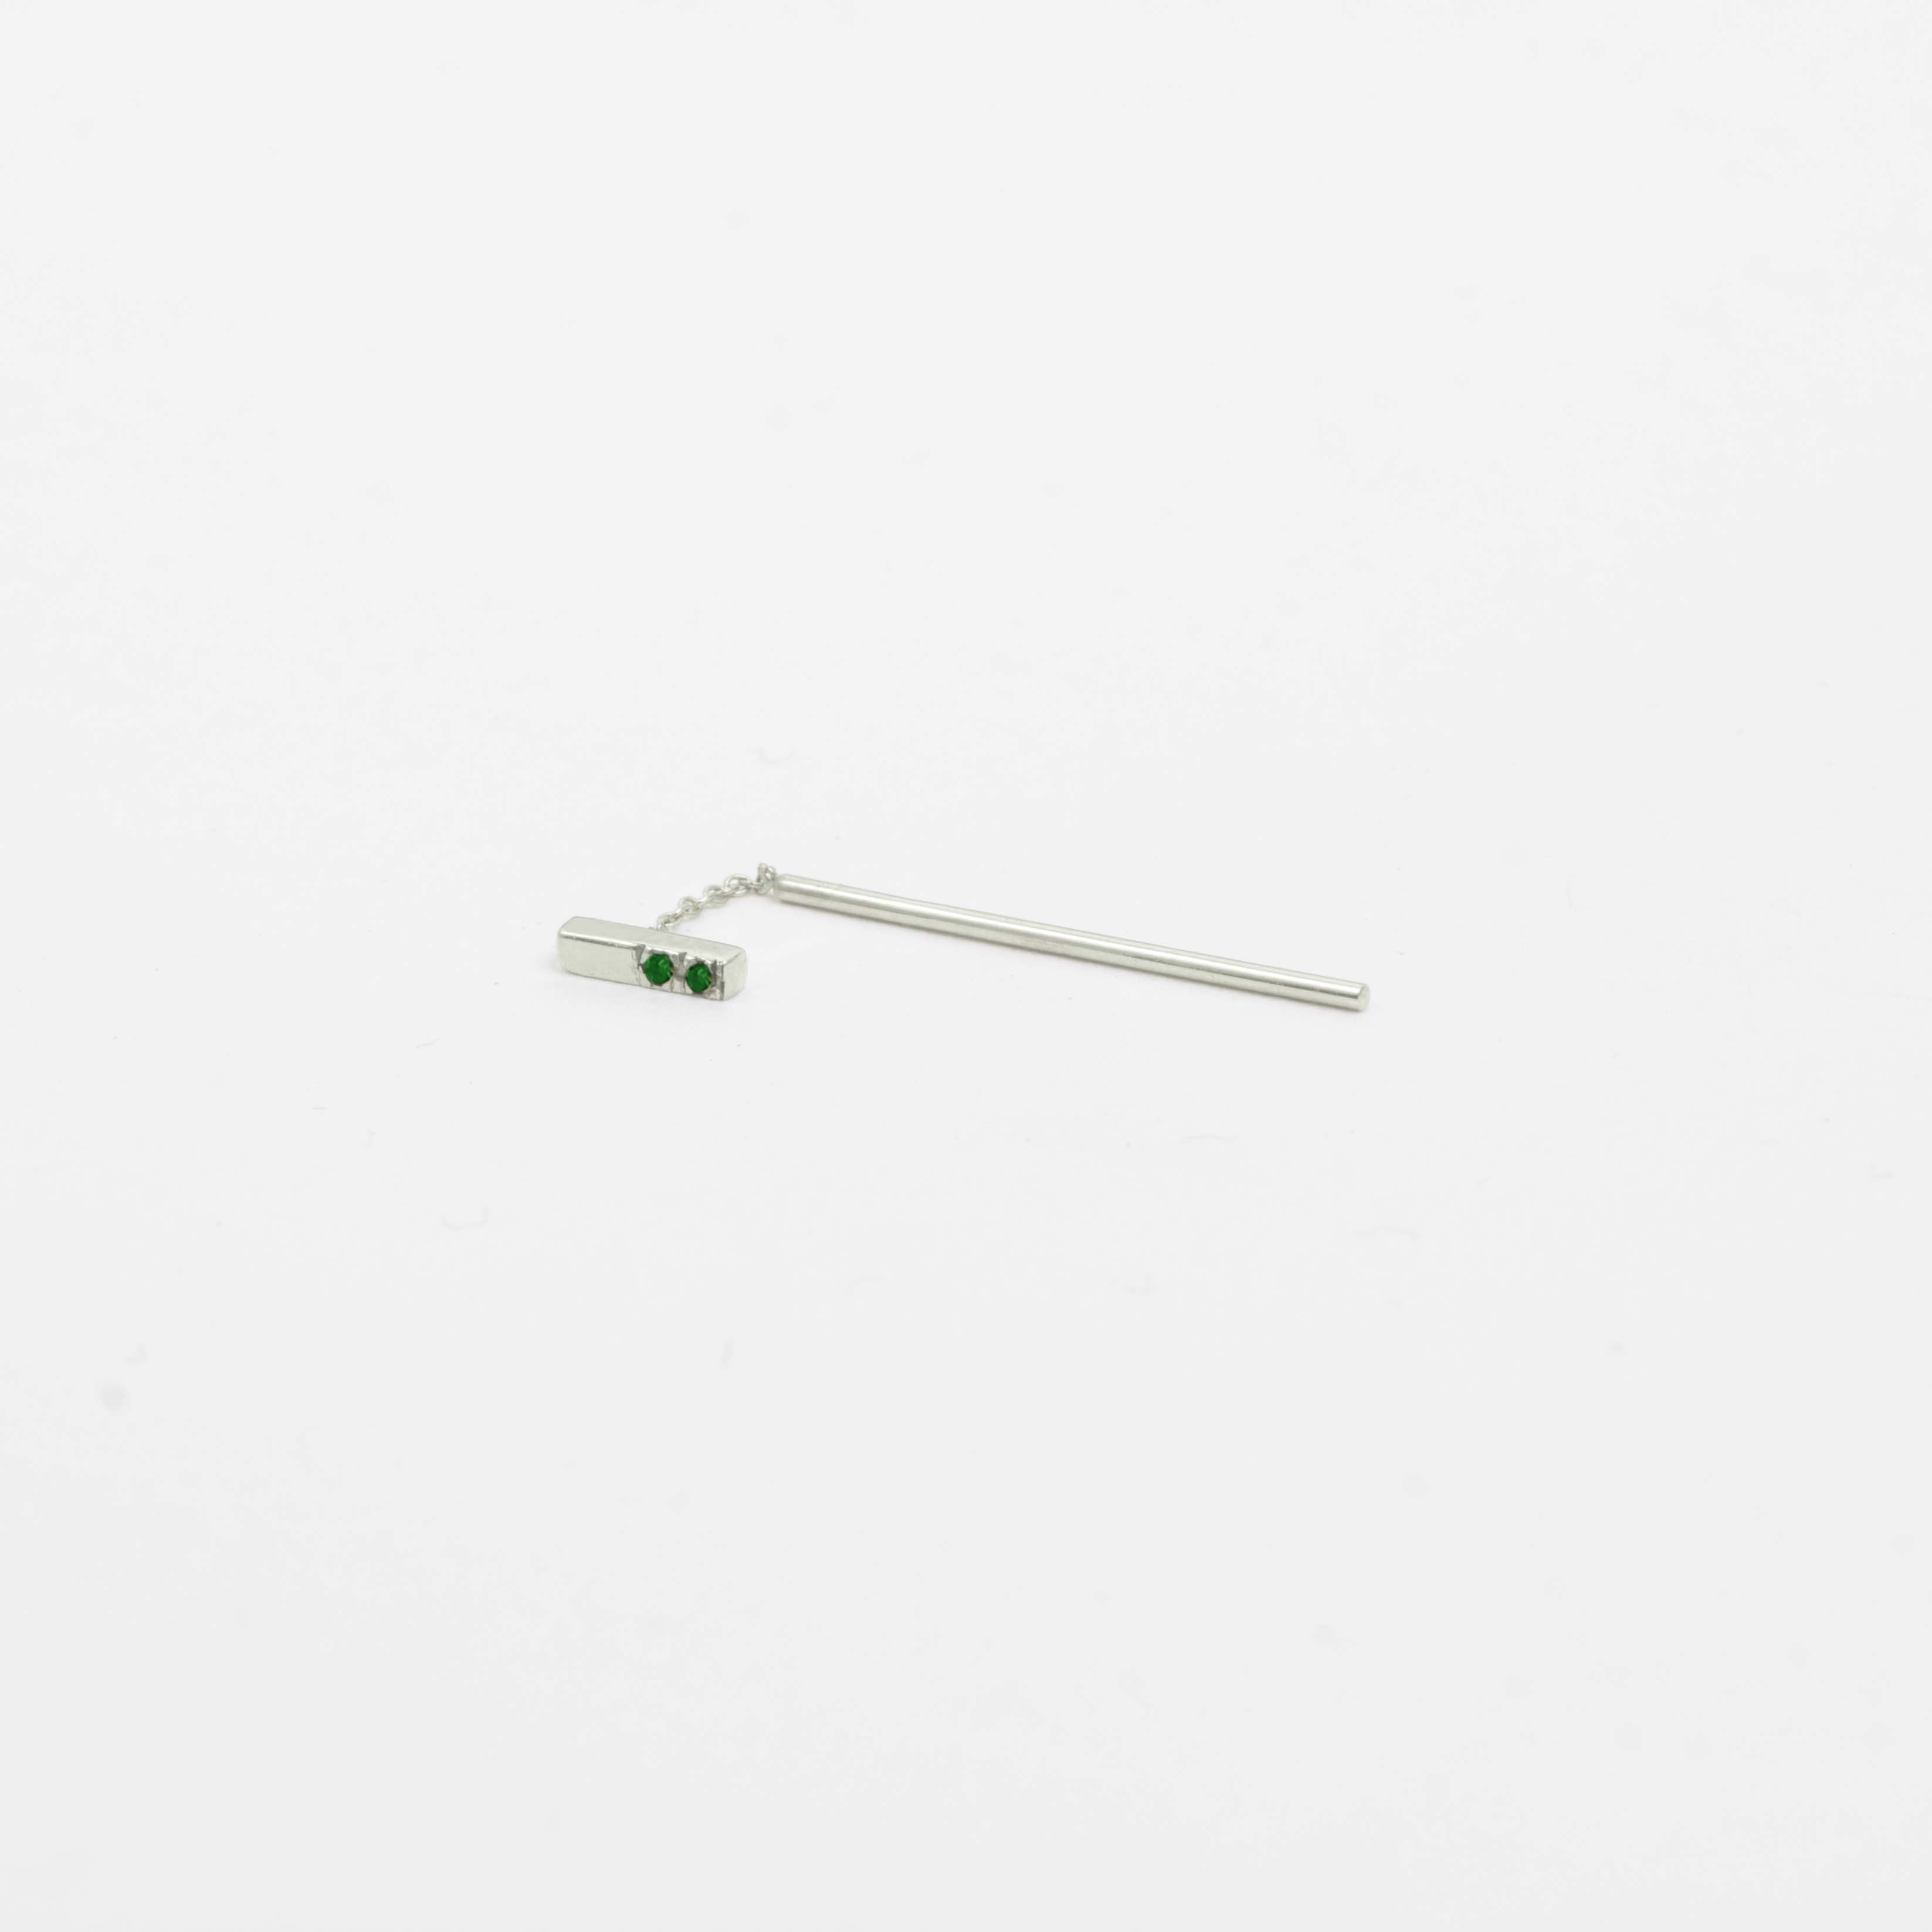 Olko Short Delicate Pull Through Earring in 14k White Gold set with Emeralds By SHW Fine Jewelry New York City